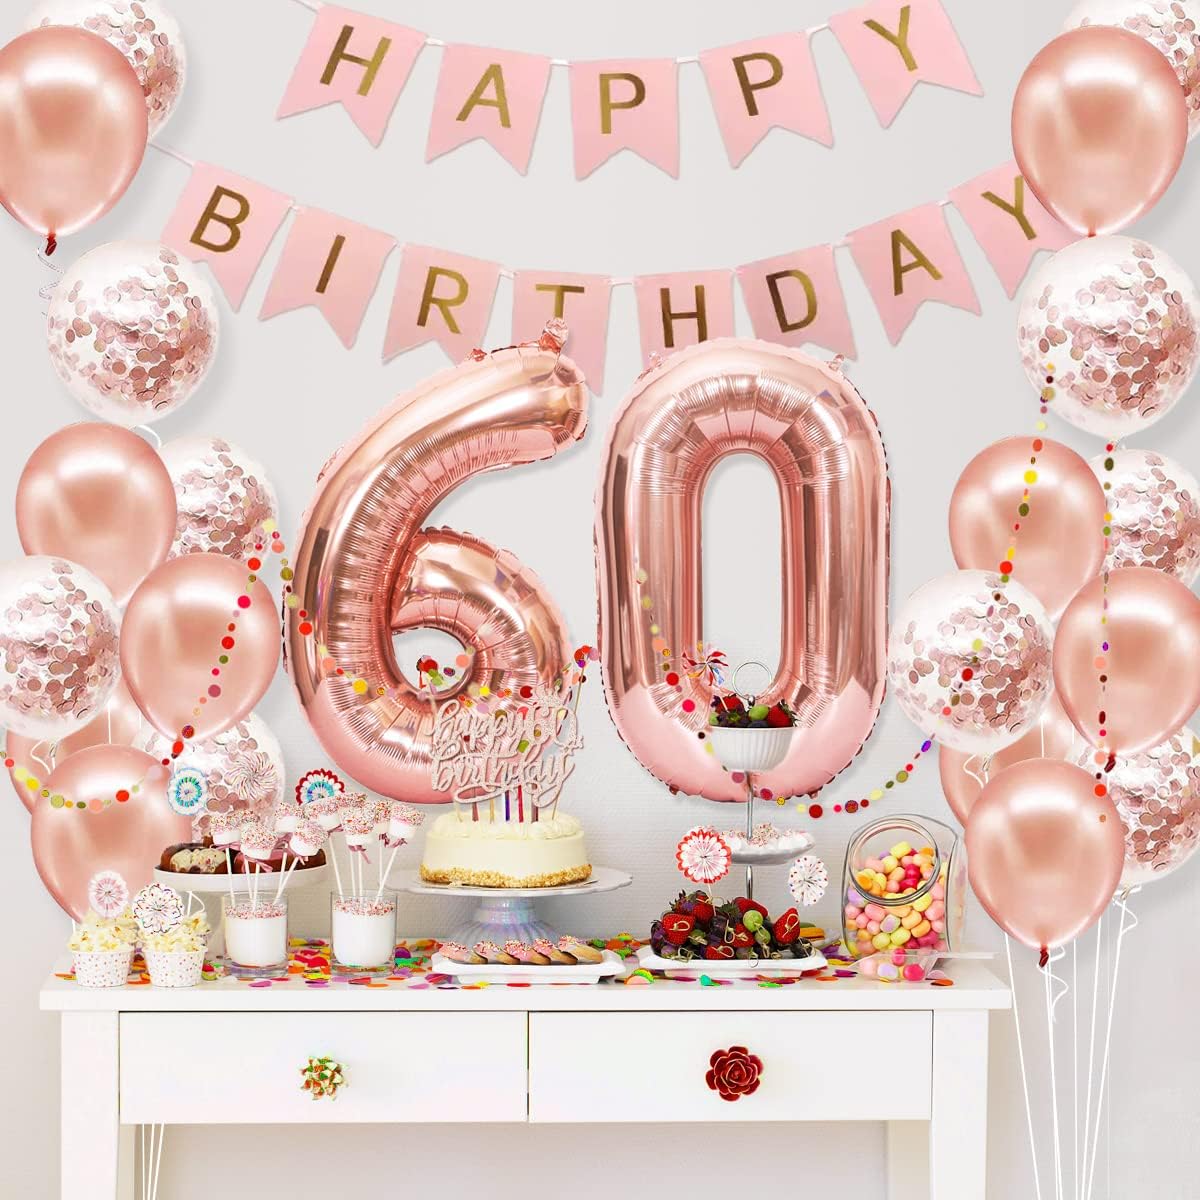 60th Birthday Decorations Women, Rose Gold 60 Birthday Party Decorations for Women, Happy 60th Birthday Banner, Crown, Sash, Cake Topper and Number Balloon, 60th Birthday Gifts for Women Decorations